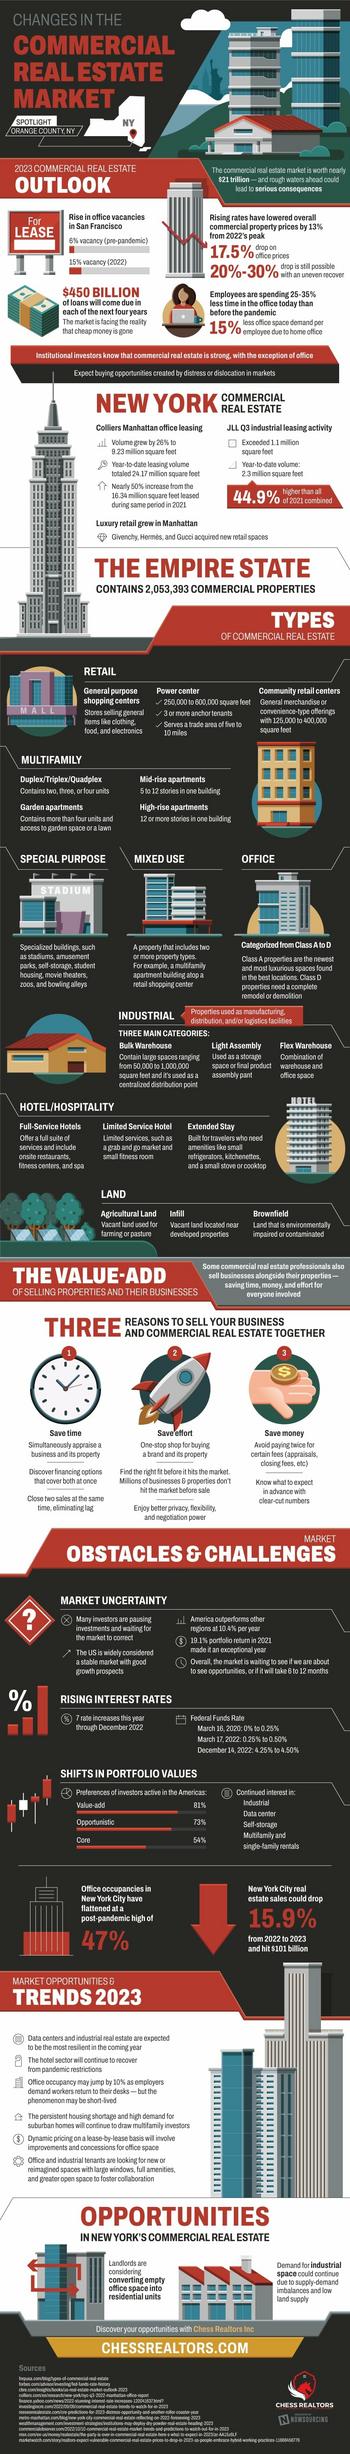 Opportunities And Challenges For Commercial Real Estate In 2023: https://www.valuewalk.com/wp-content/uploads/2023/03/commercial-real-estate-market-infographic.jpg